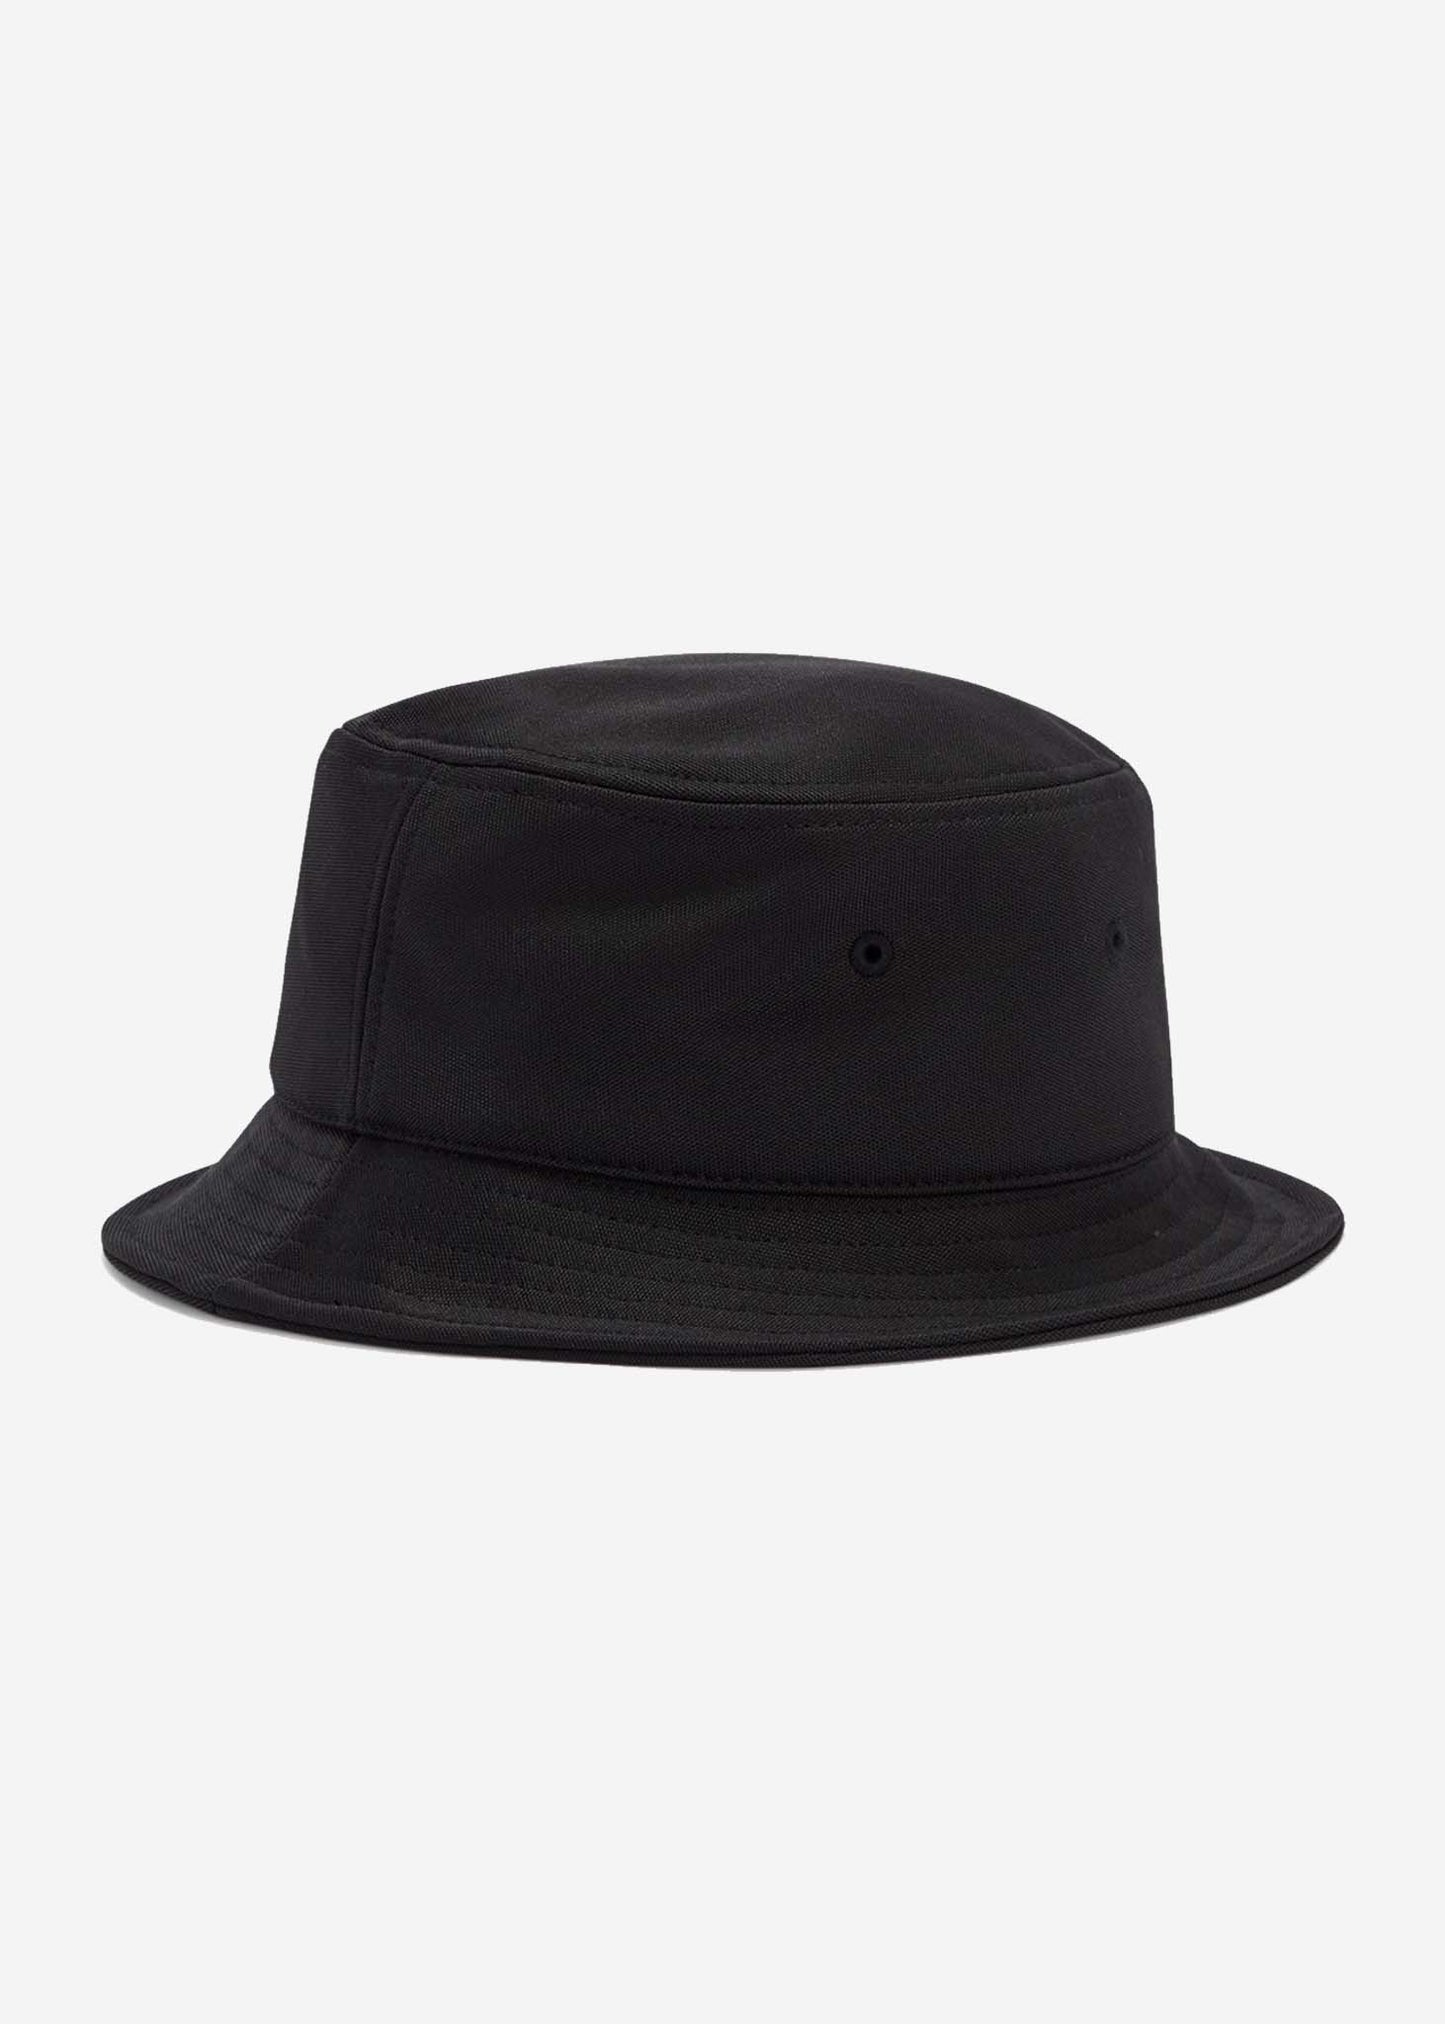 Fred Perry Bucket Hats  Arch branded tricot bucket hat - black 